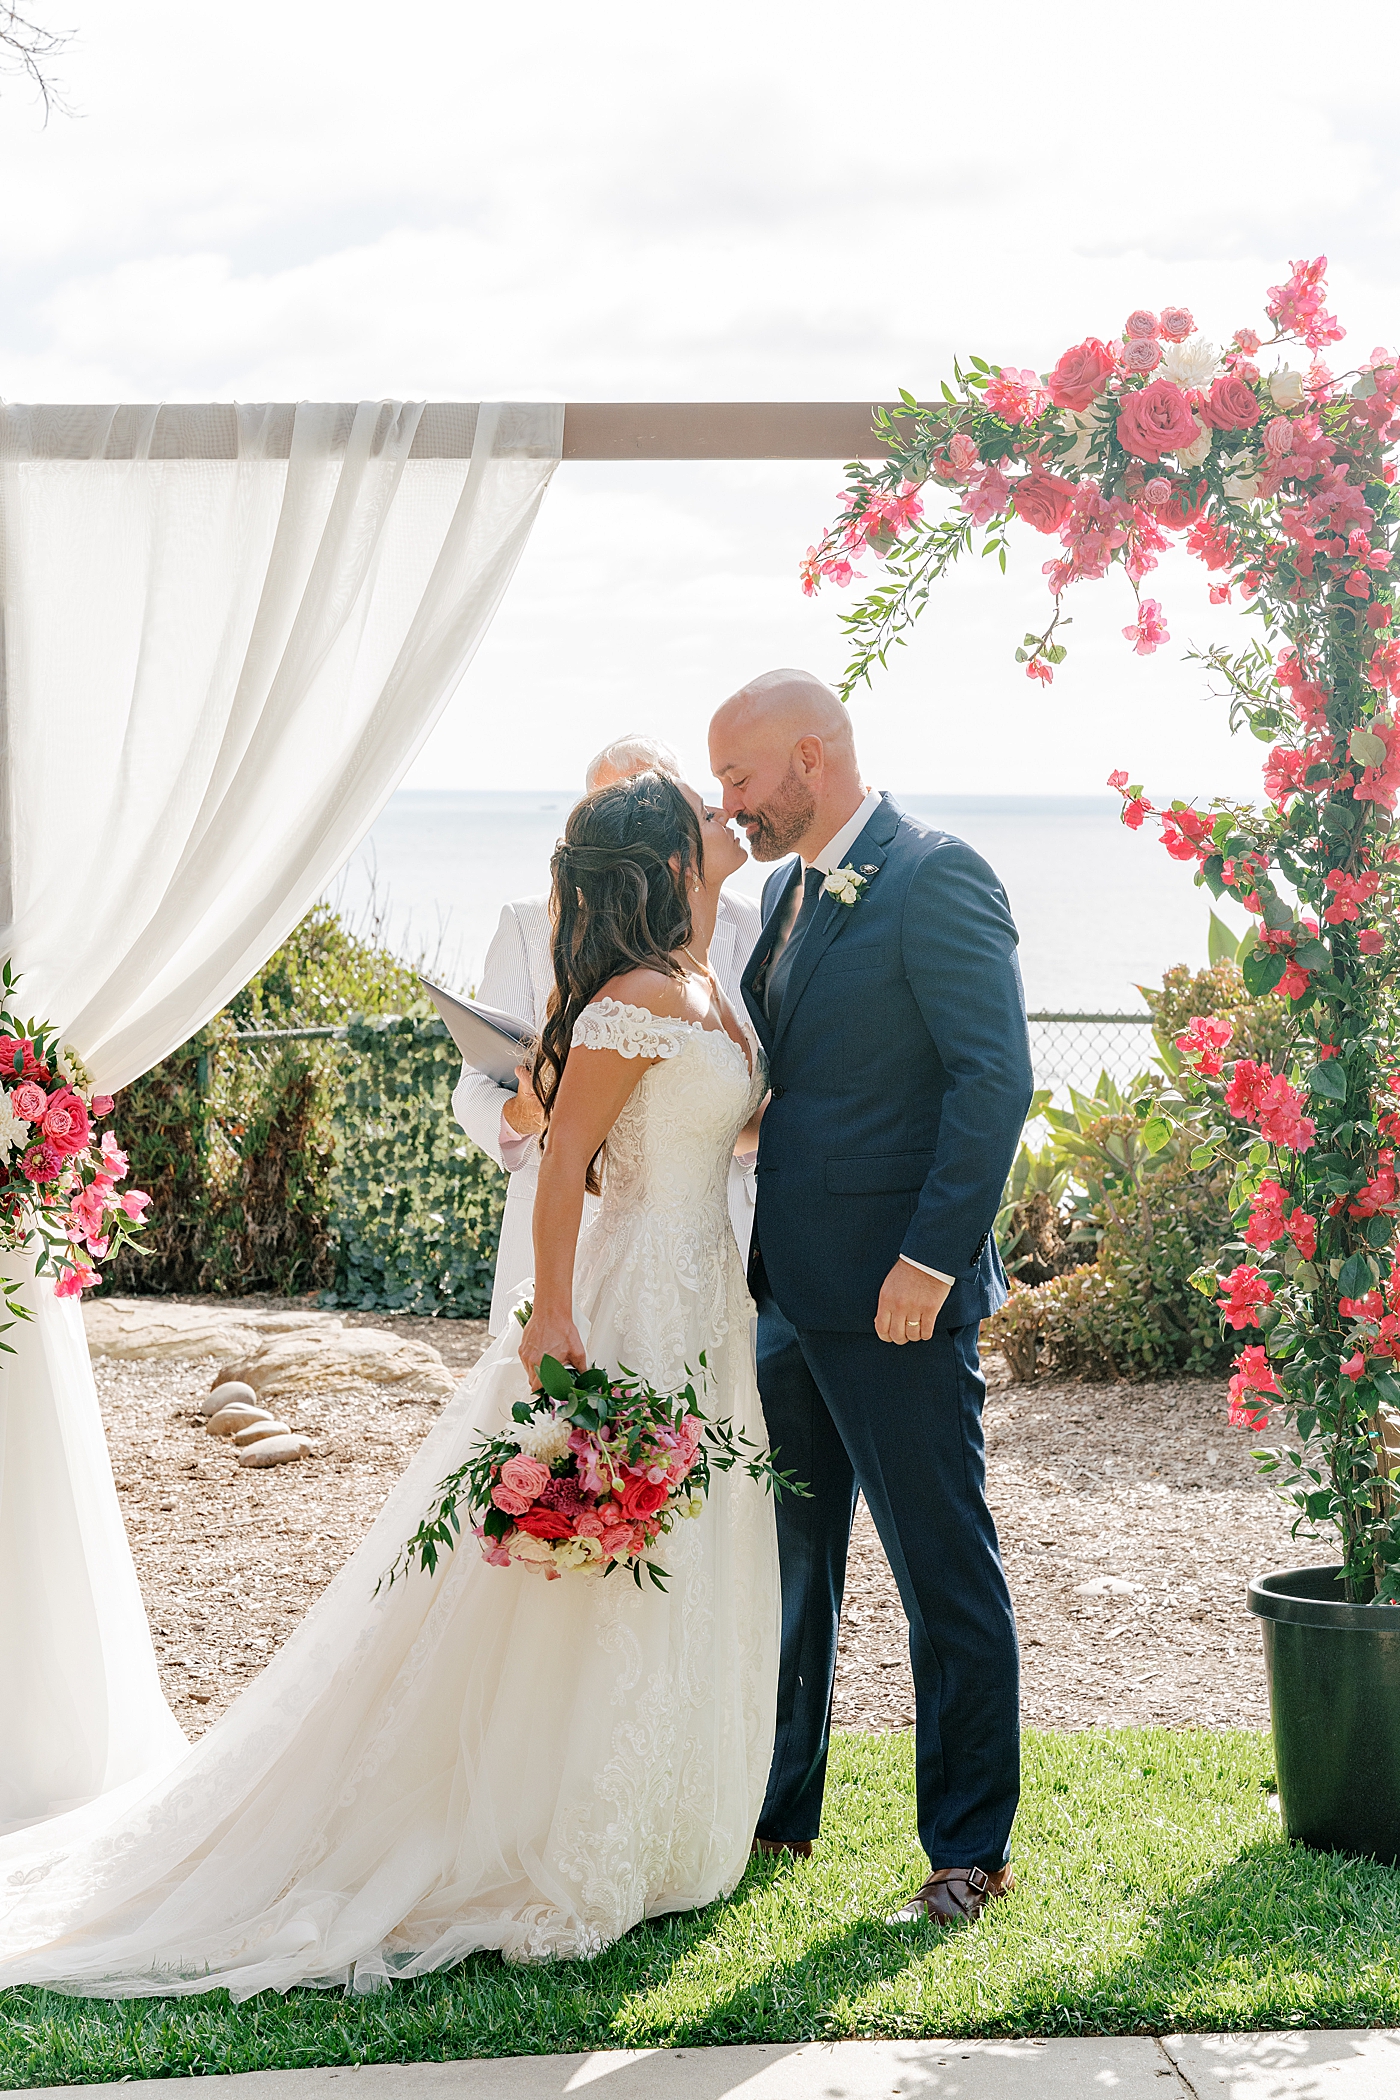 Backlit image of the bride and groom about to kiss at the wedding arch | Image by San Diego Wedding Photographer Hope Helmuth